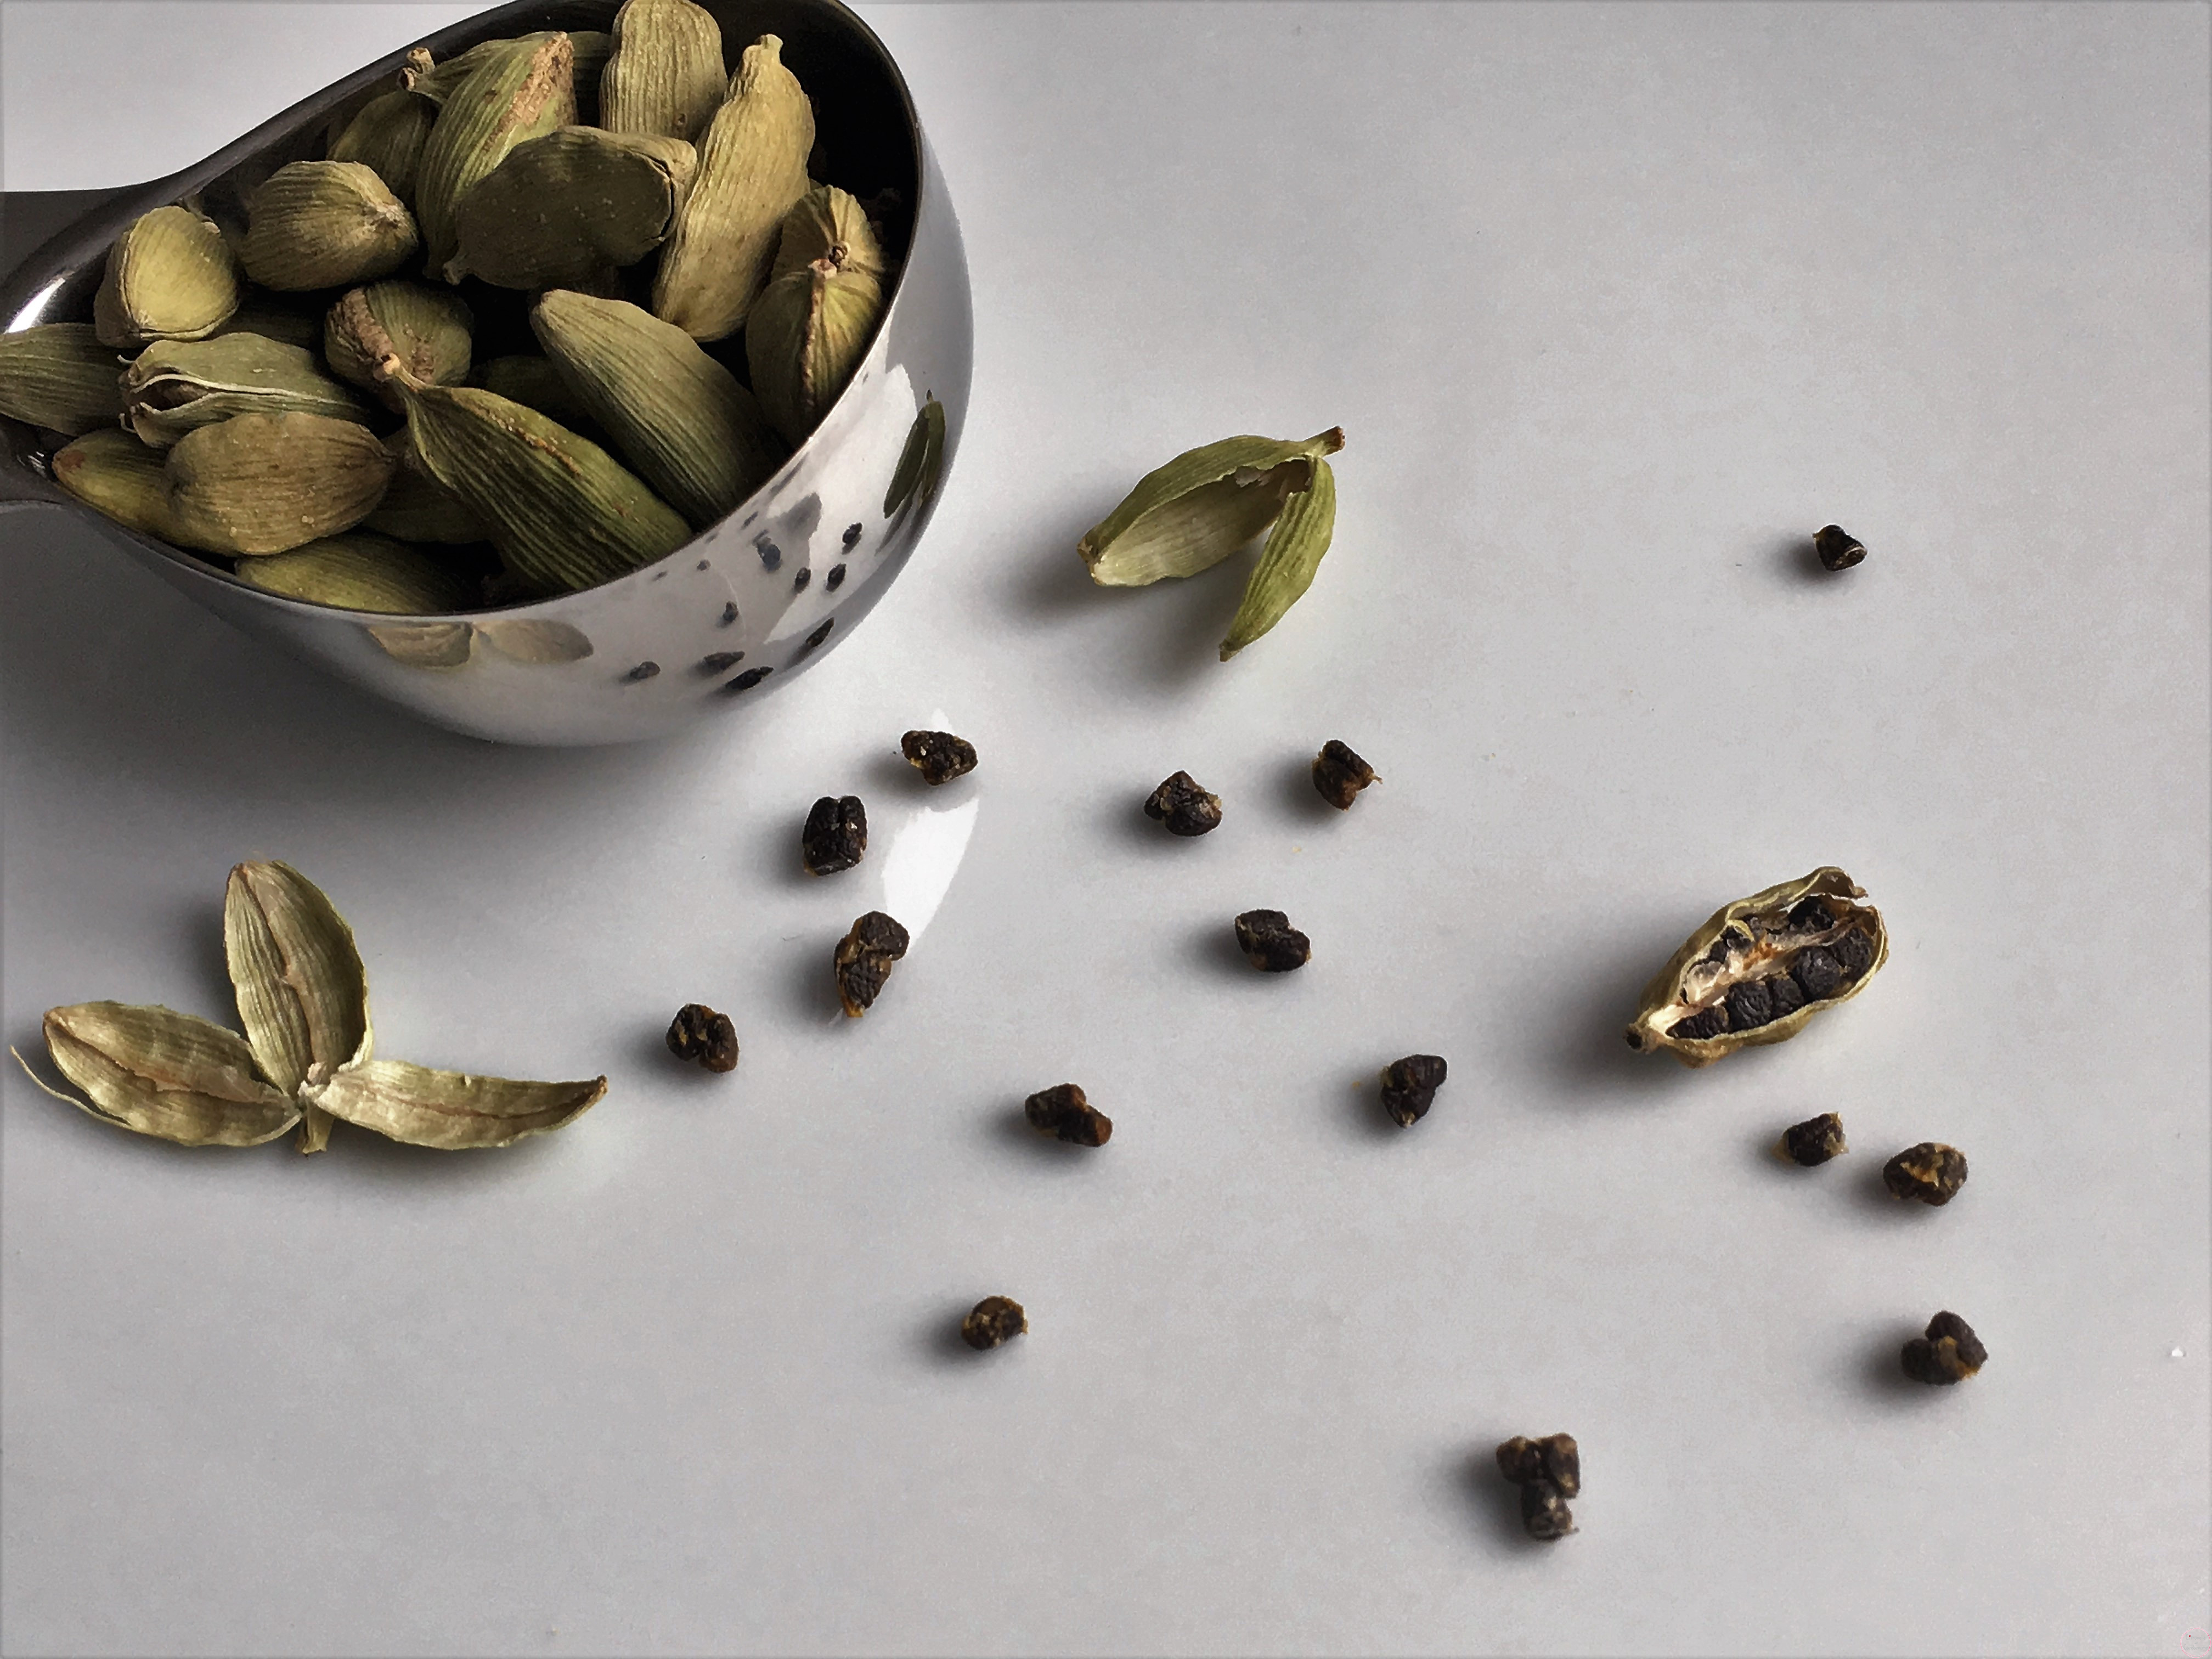 La Cardamome - Citronelle and Cardamome - Blog culinaire, recettes saines  et gourmandes